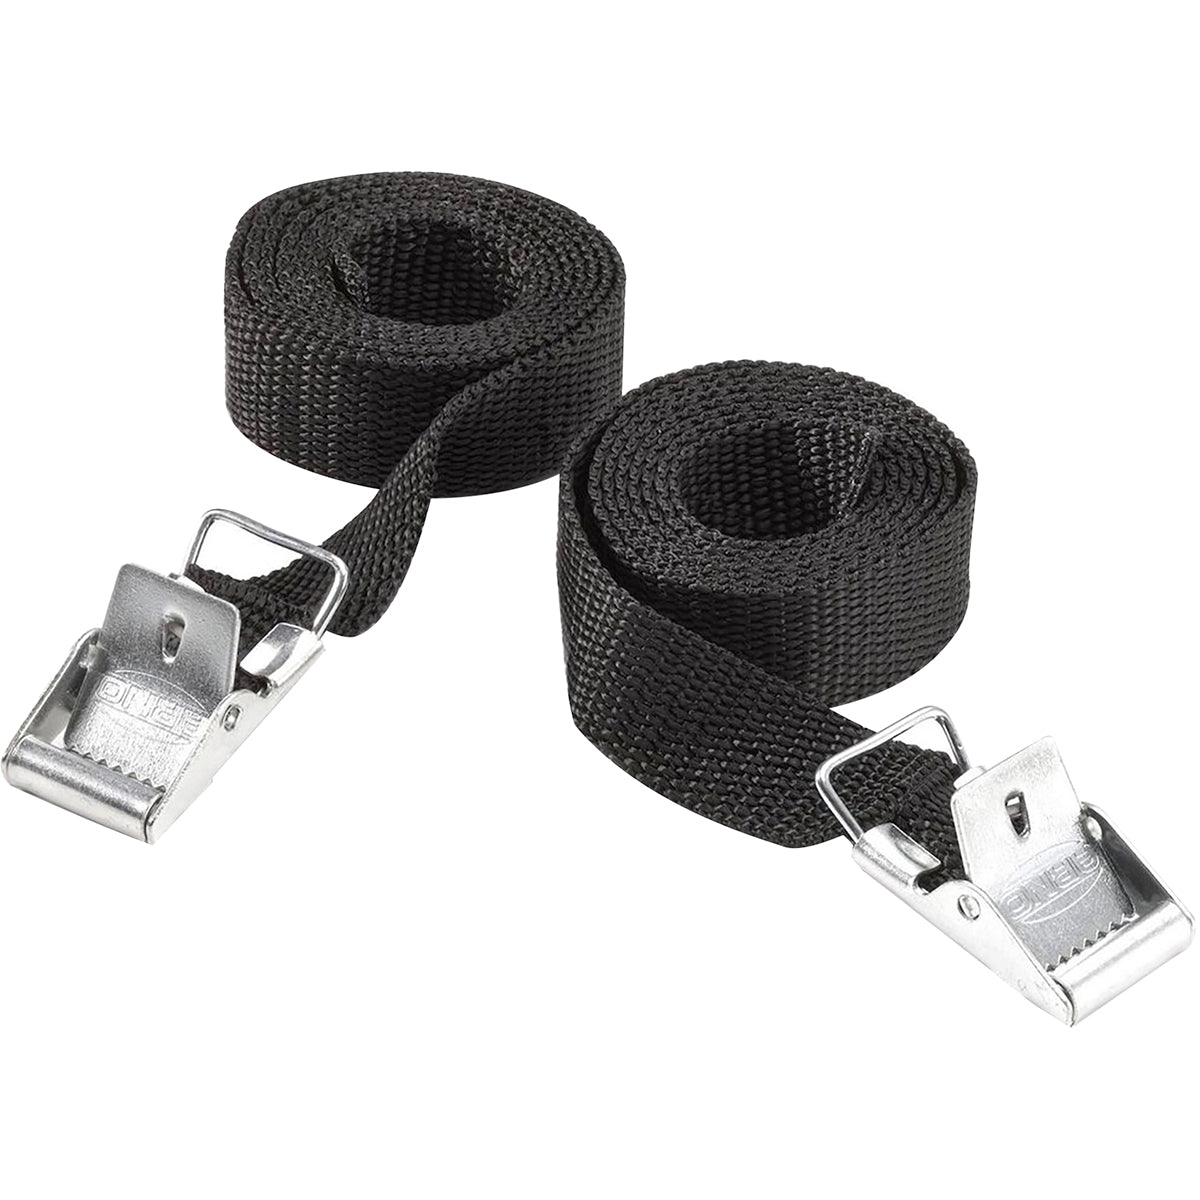 Coghlan's 36" Arno Straps (2 Count), Woven Polyester, Camping Hiking Survival Coghlan's